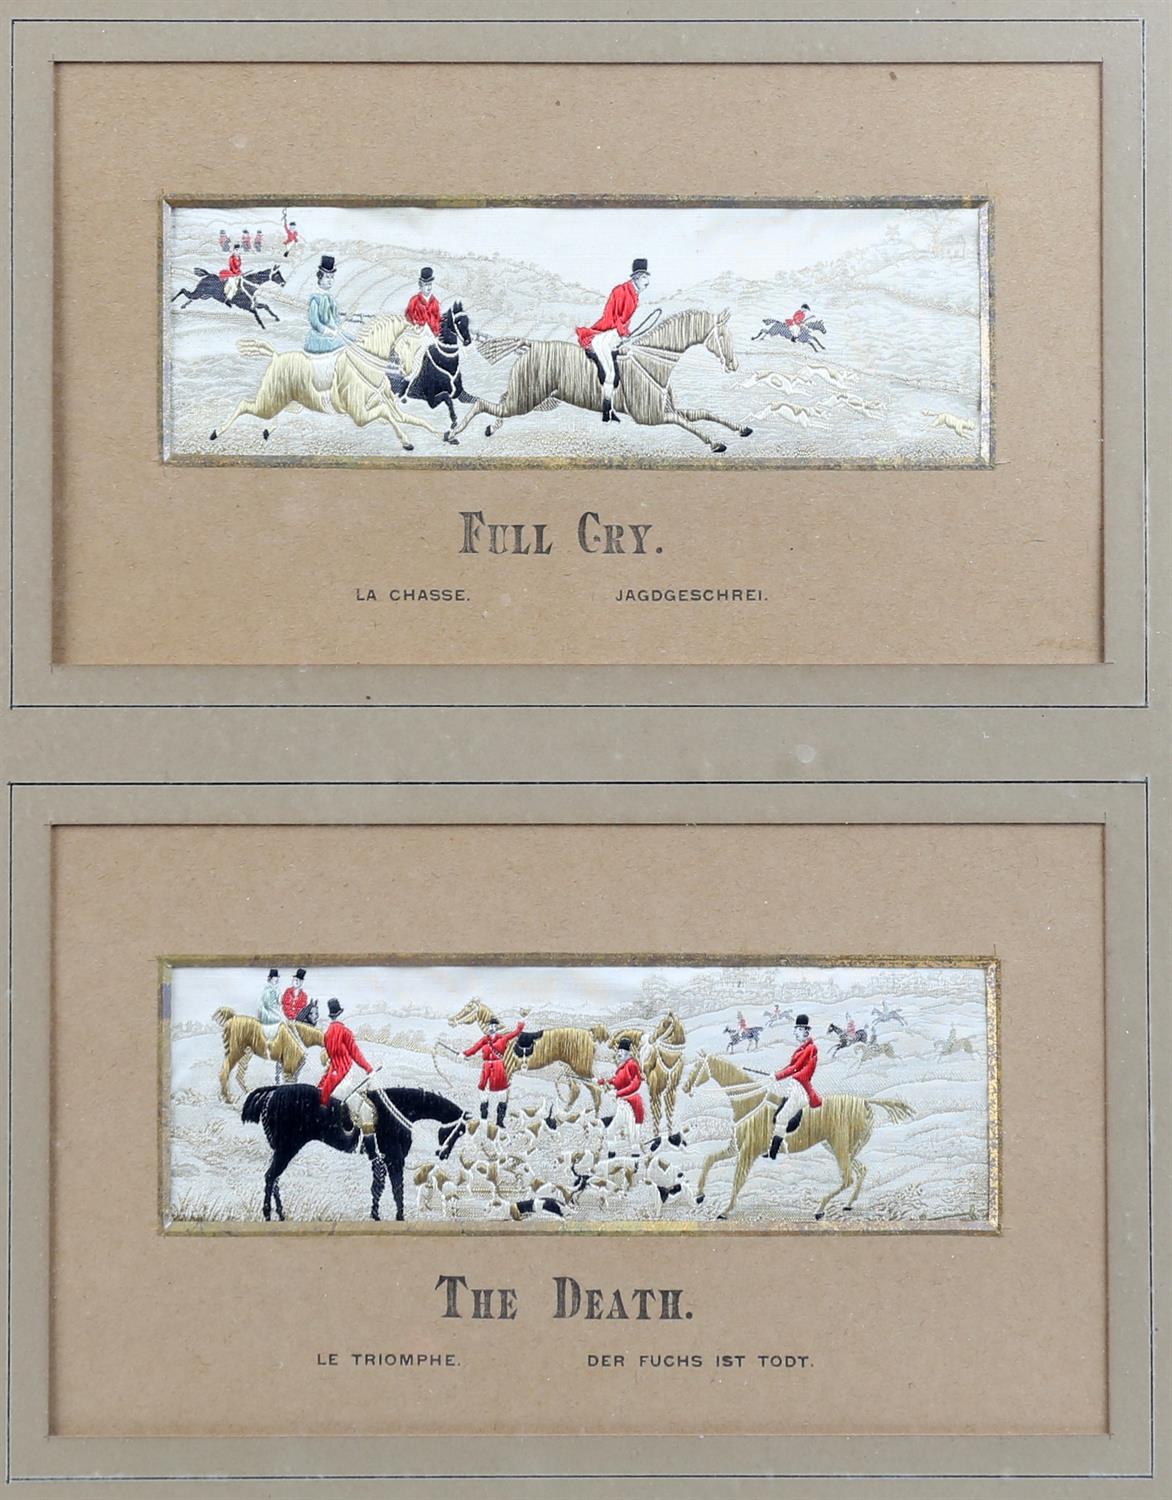 Set of four French embroidered hunting images, with captions. Framed and glazed as a set. - Image 3 of 3